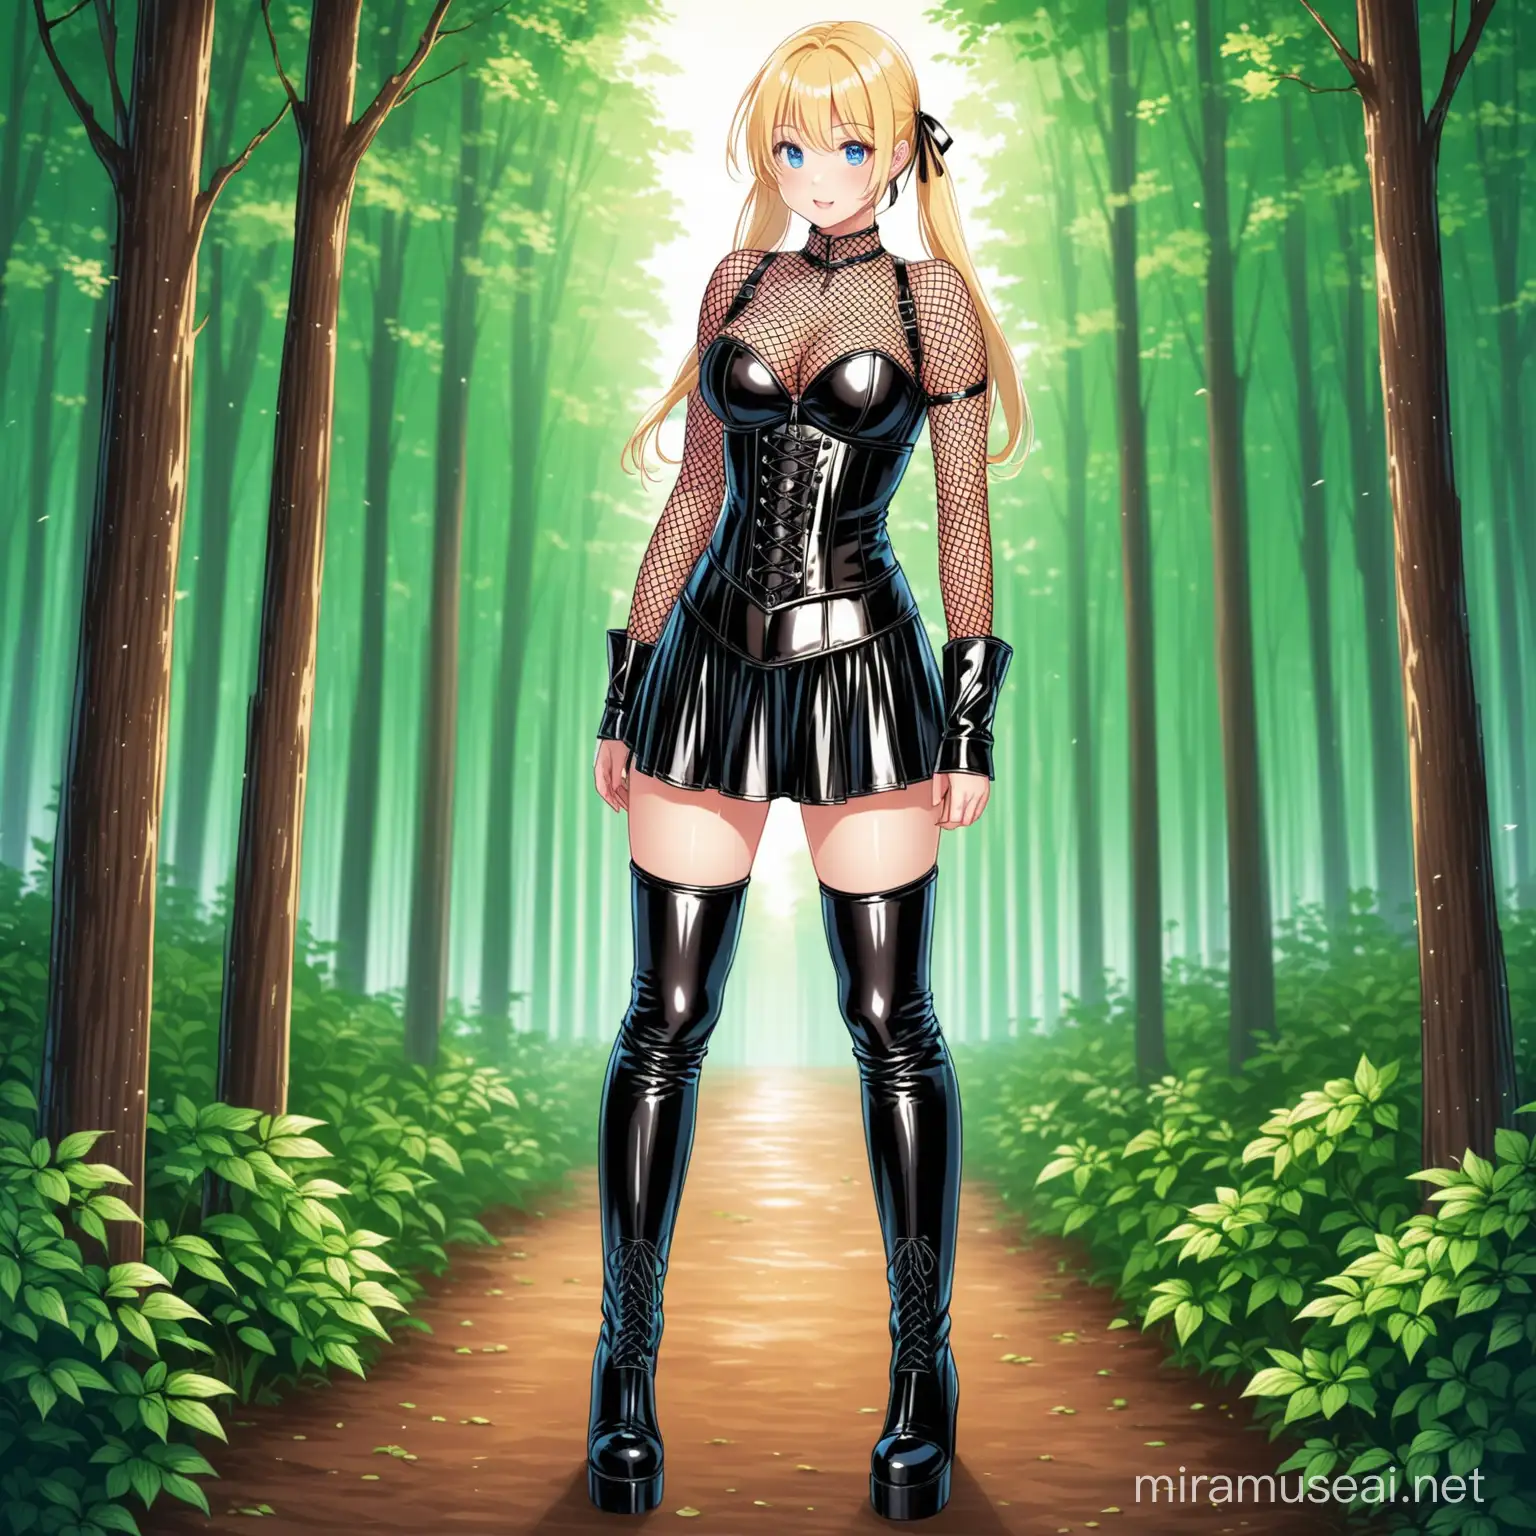 A cute woman with long blonde pigtails, blue eyes, wearing a fishnet top, leather corset and latex skirt, knee high leather boots, standing a forest.
Negative 